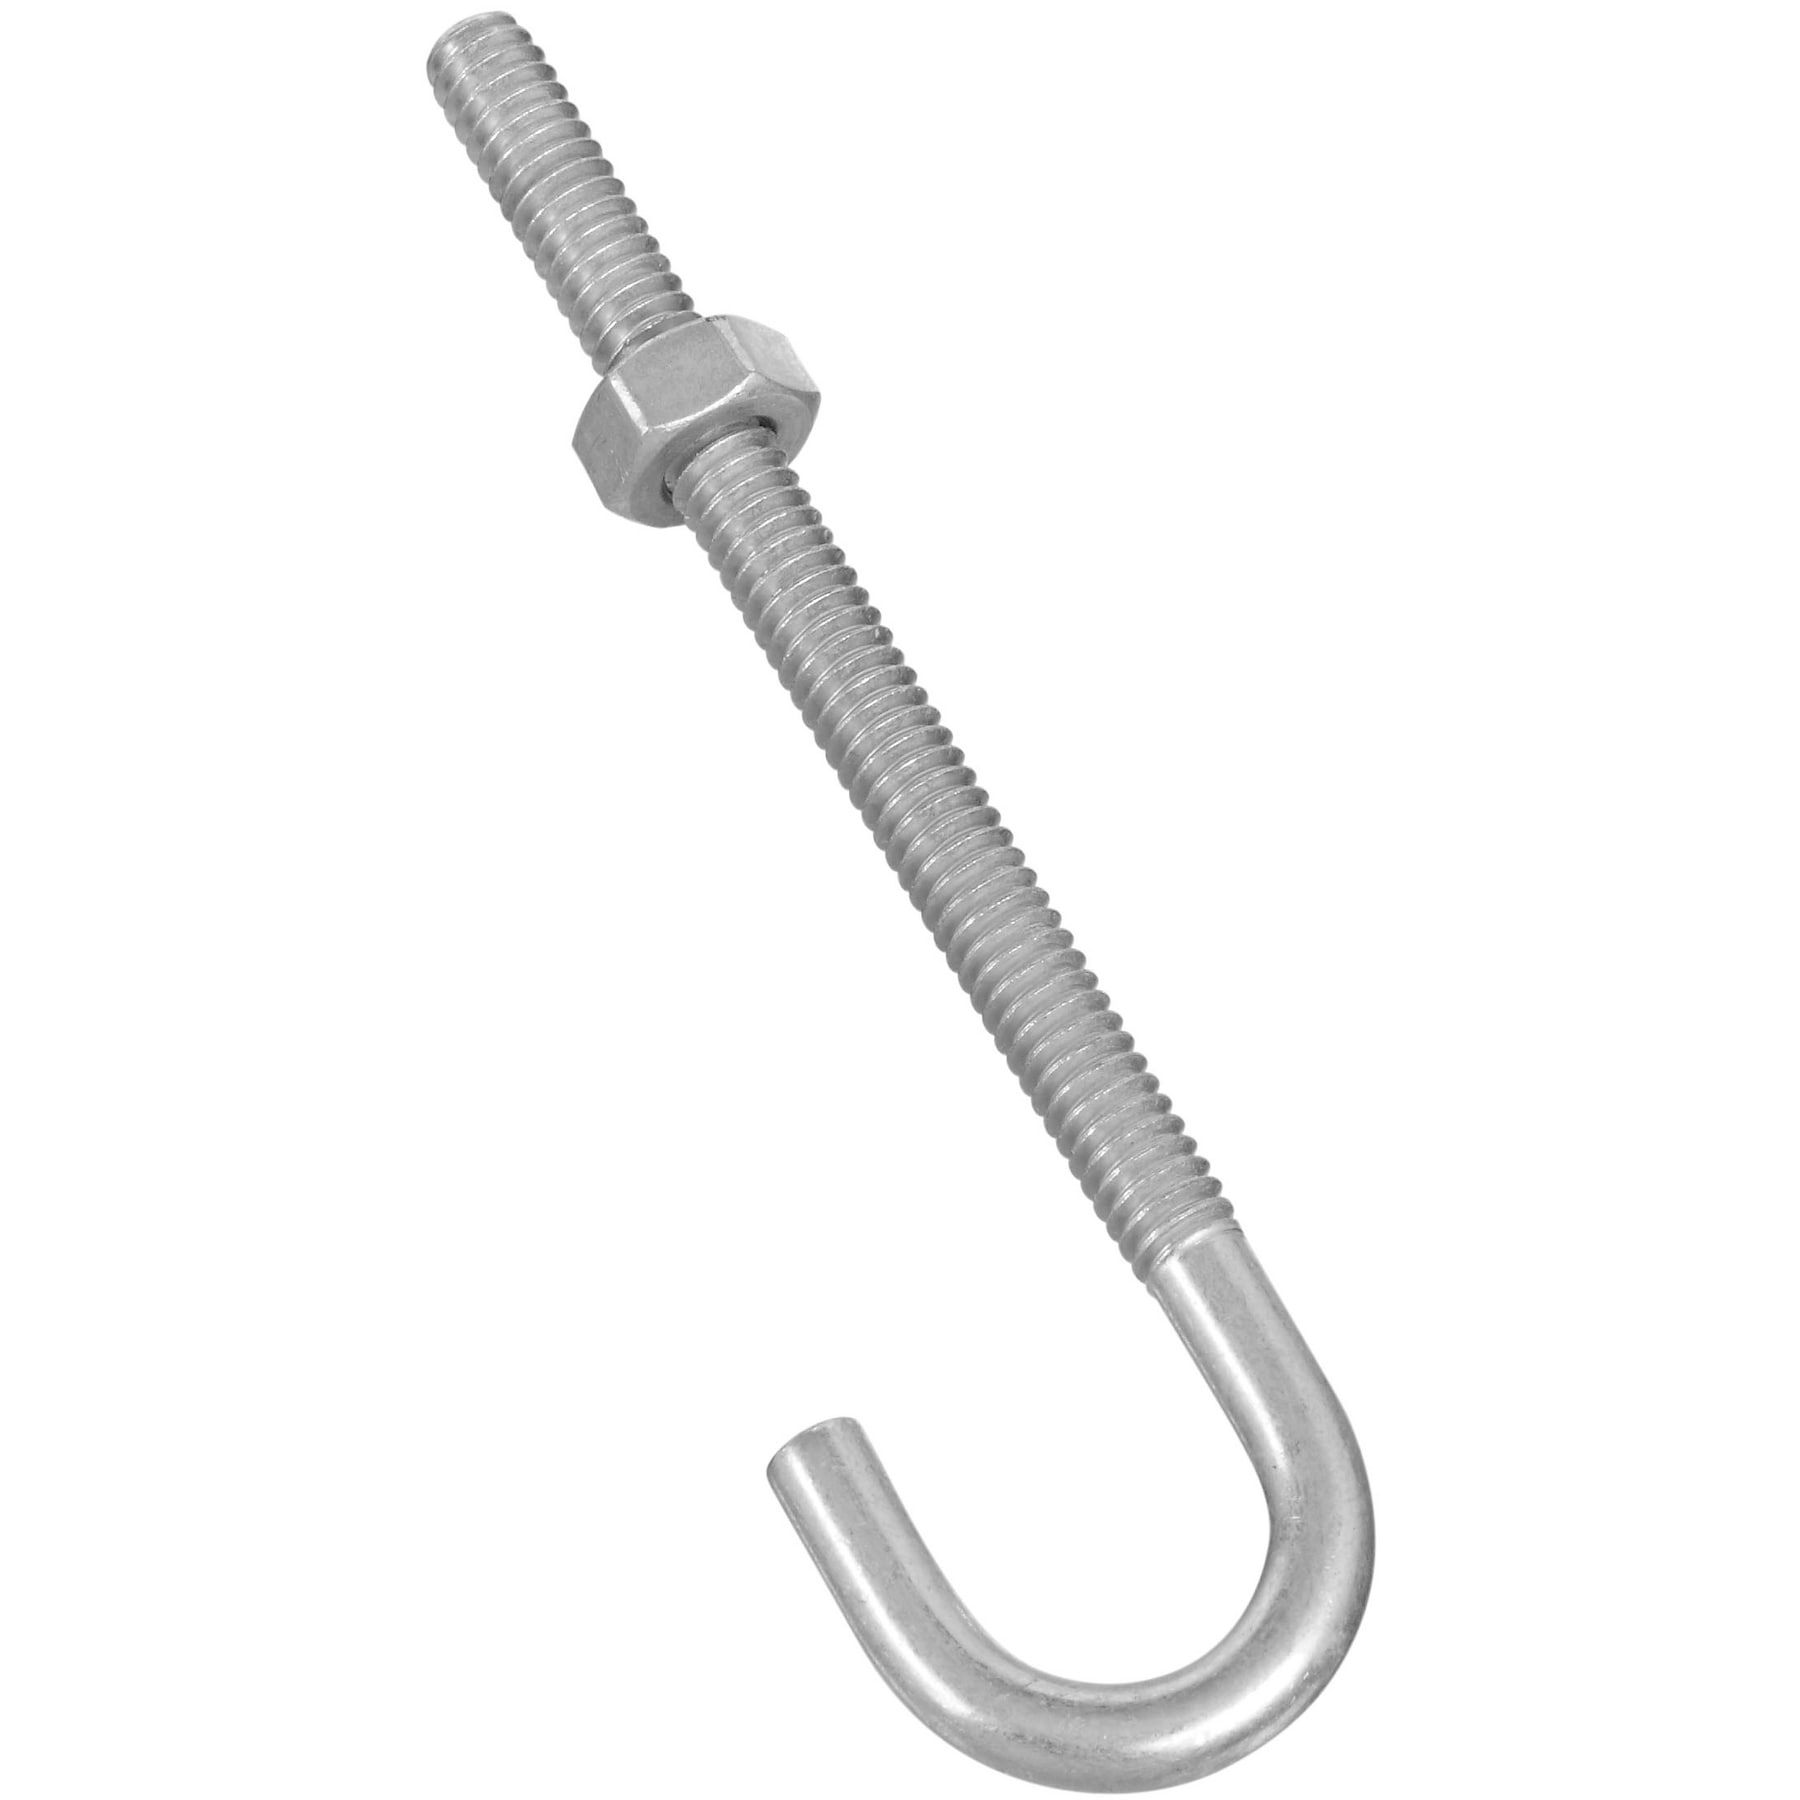 Large J Hook 1/4" Forged Auto Tow Hooks with 1/2" Link 